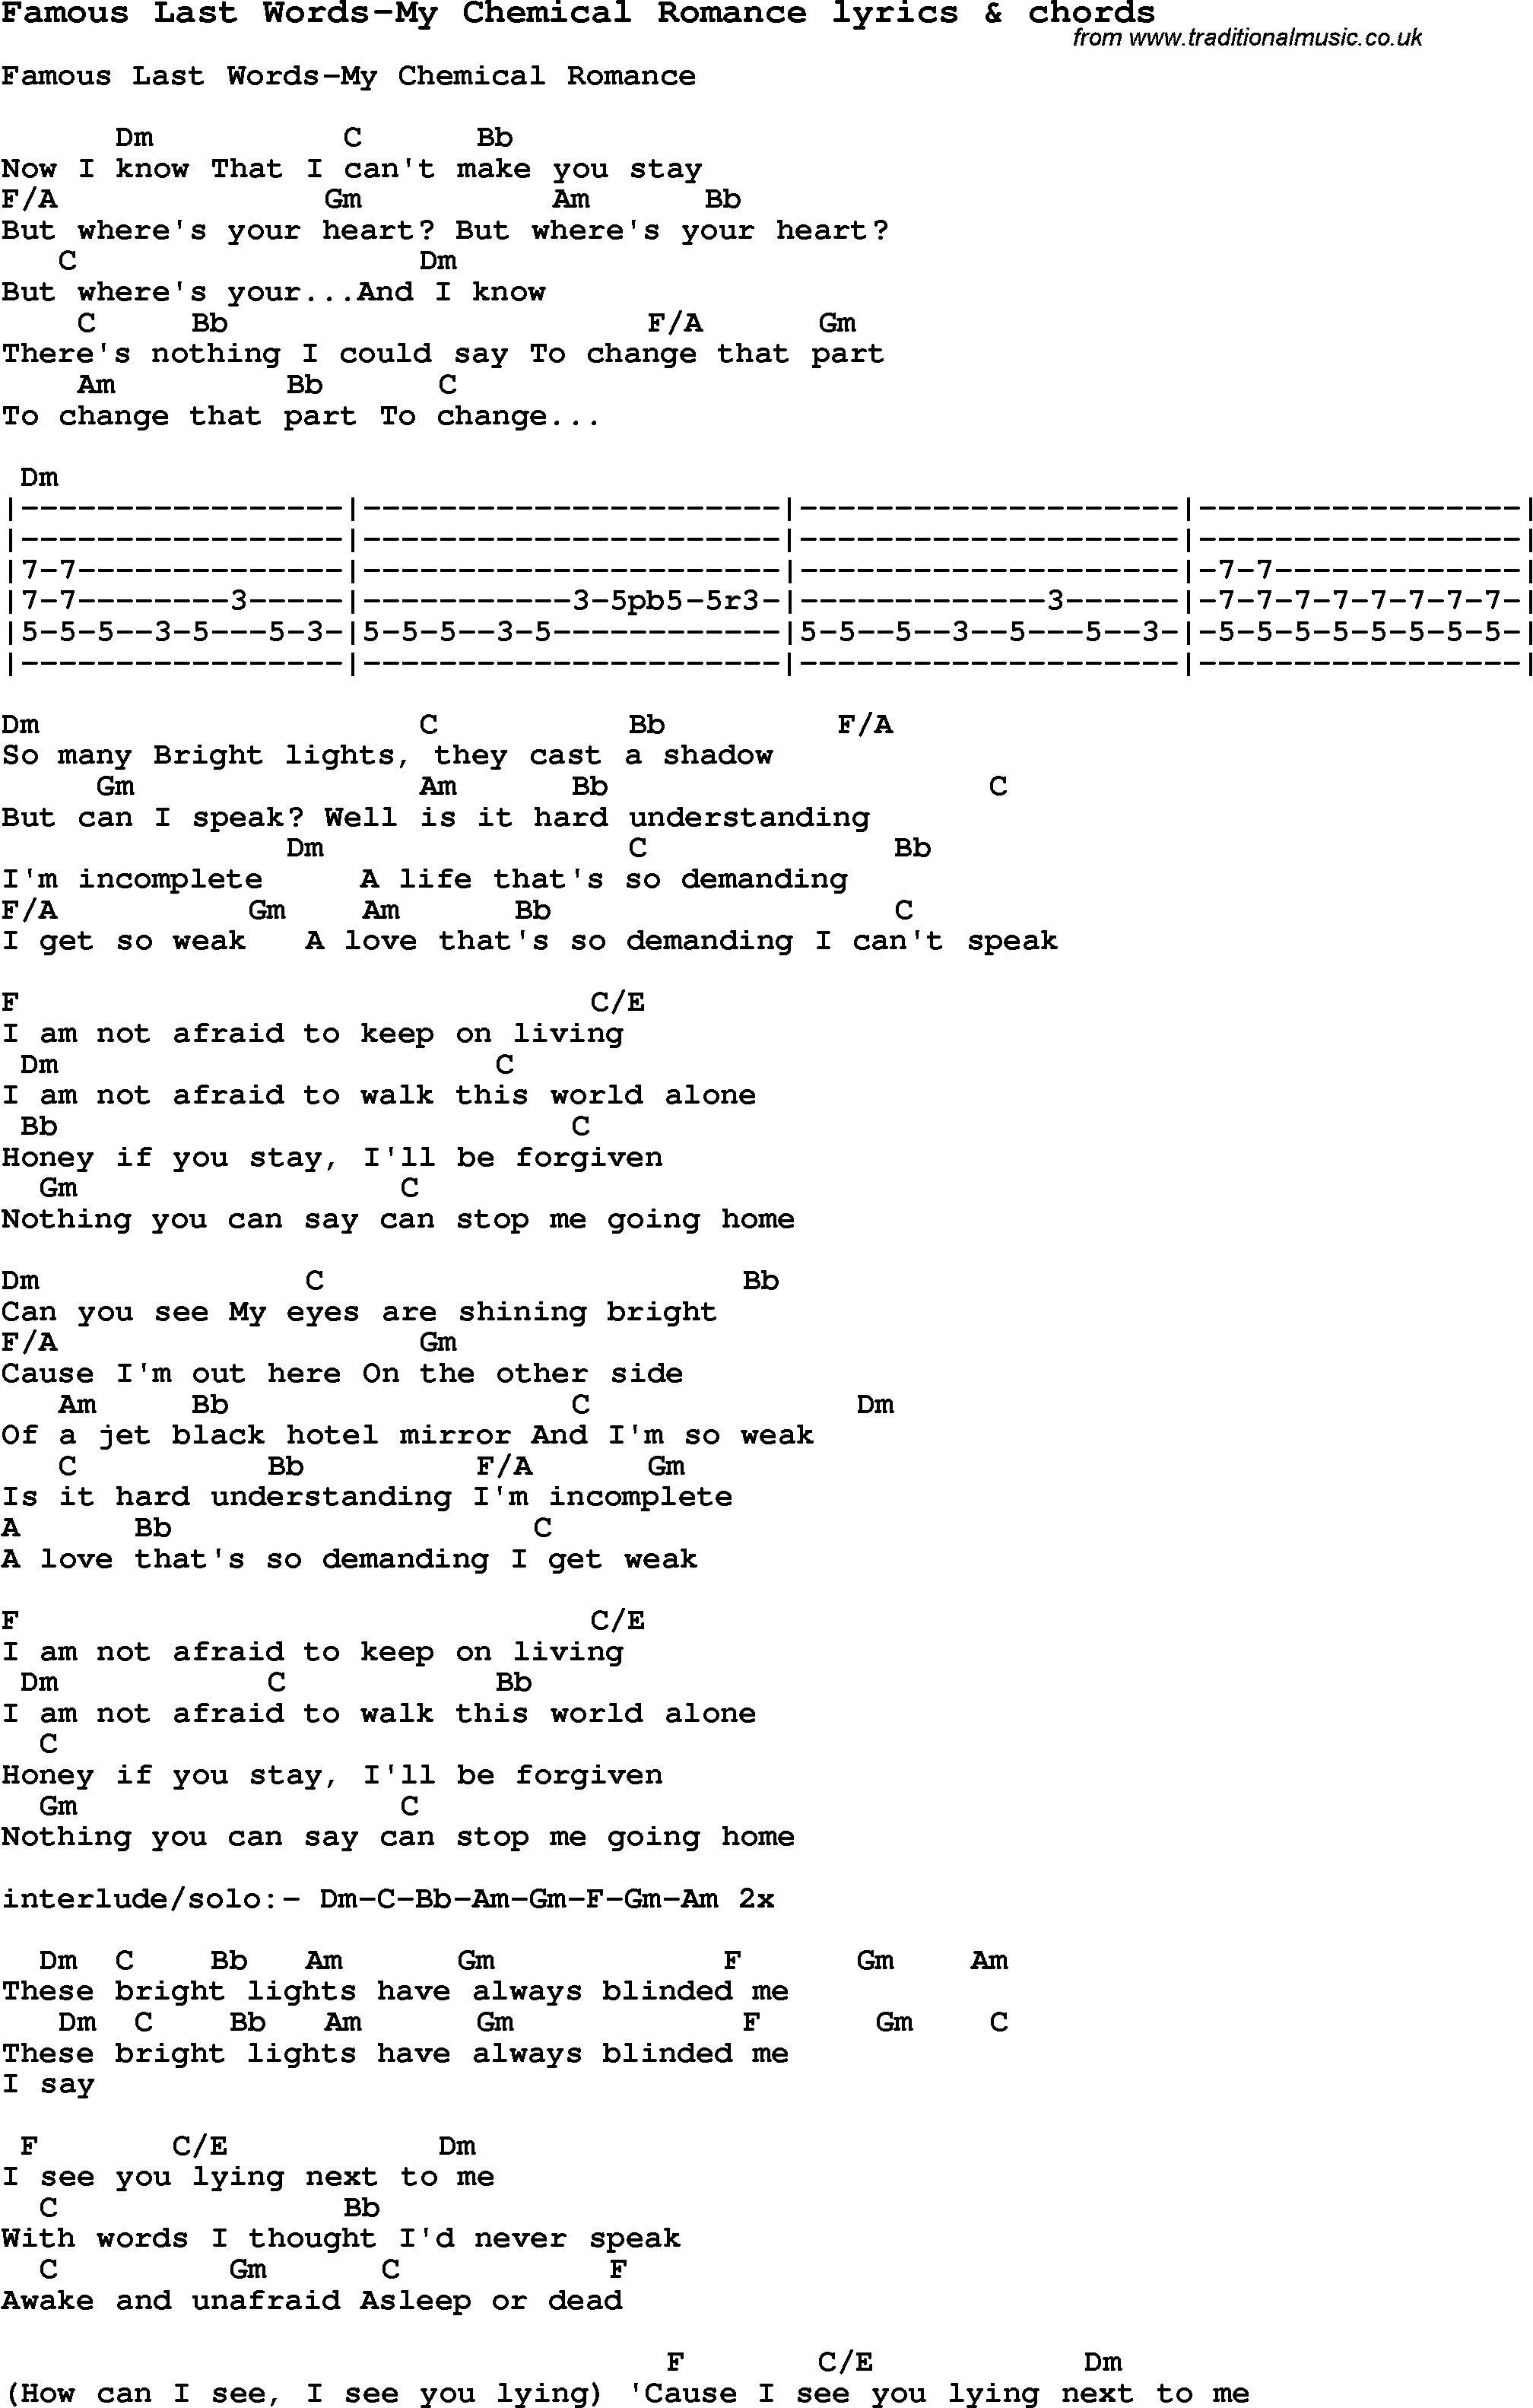 Love Song Lyrics for: Famous Last Words-My Chemical Romance with chords for Ukulele, Guitar Banjo etc.